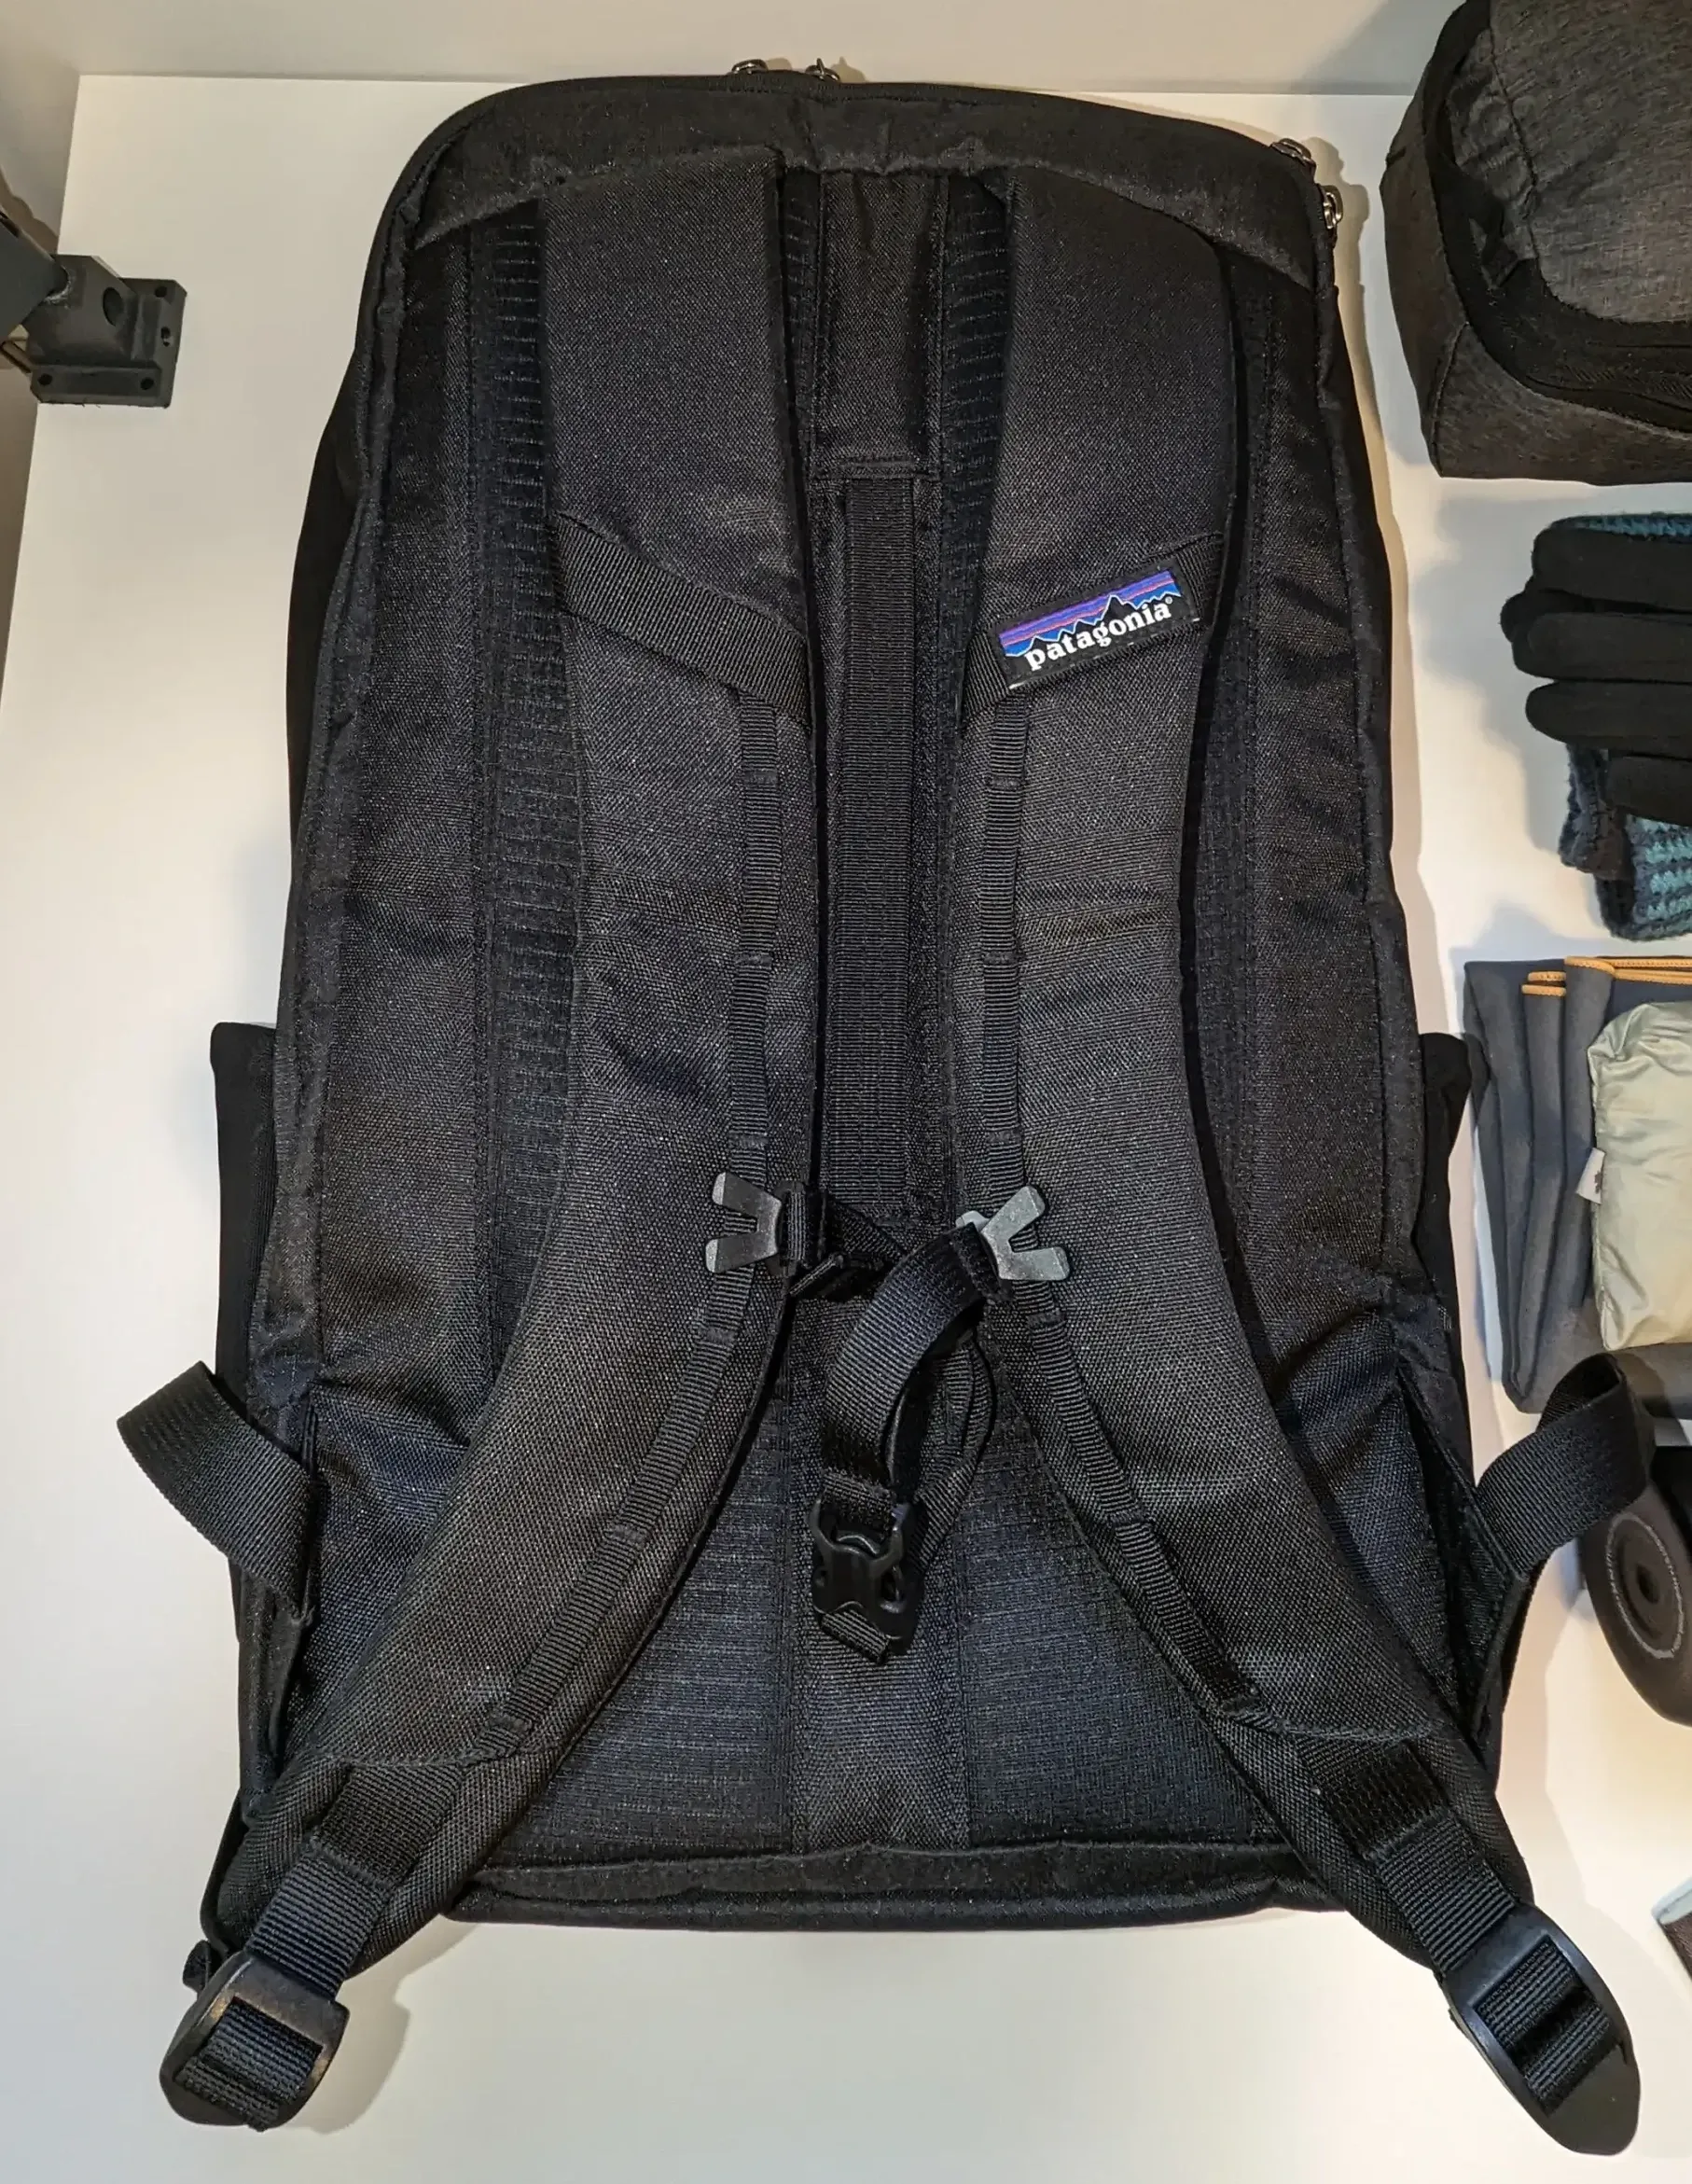 Patagonia Black Hole Pack 32L Review (2023) - The Best Commuter/ Travel Bag?